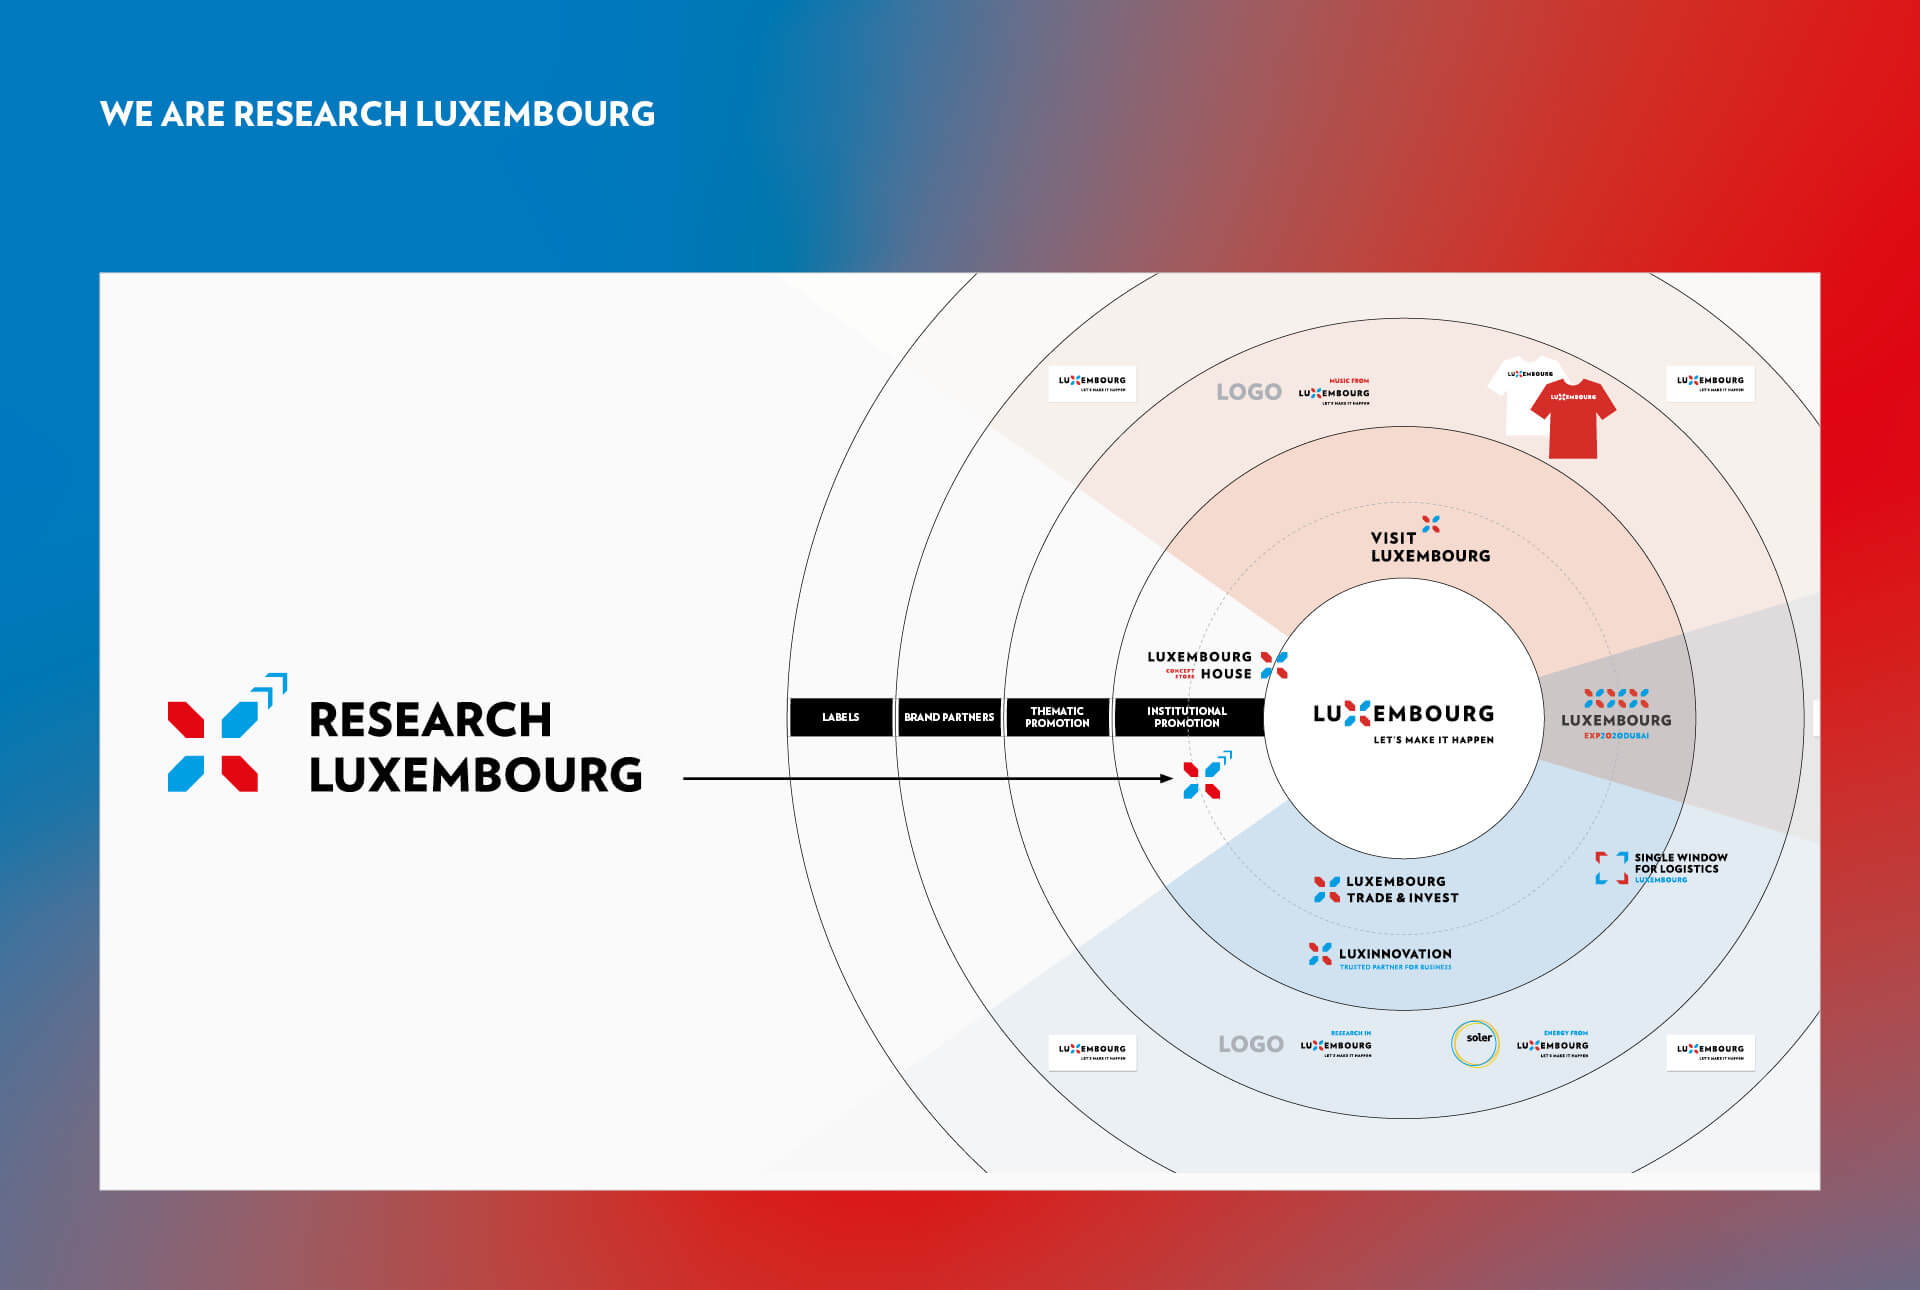 Research Luxembourg